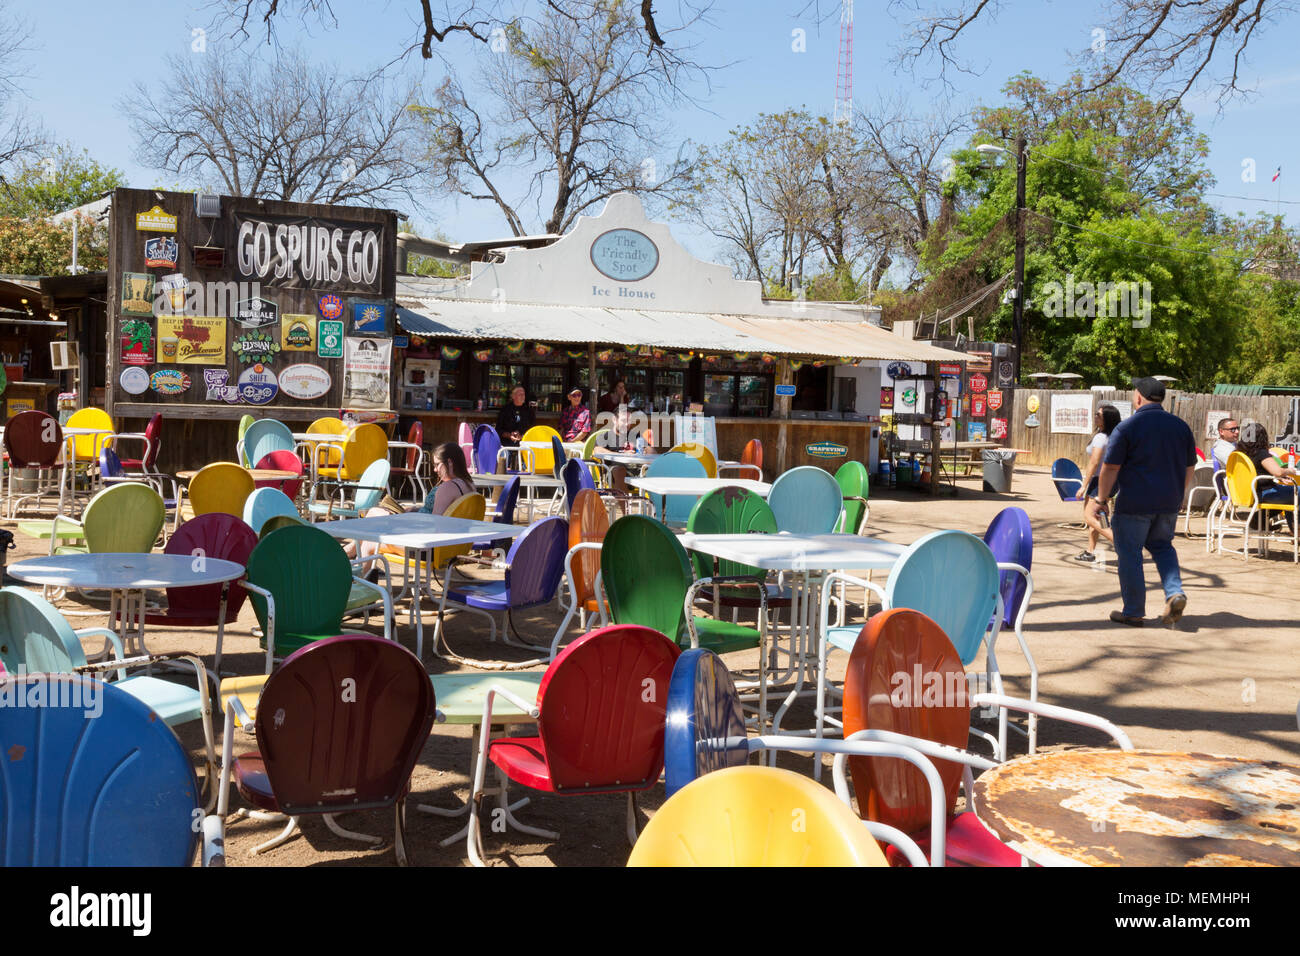 People drinking in the Friendly Spot Ice house, bar and cafe, San Antonio, Texas United states of America Stock Photo